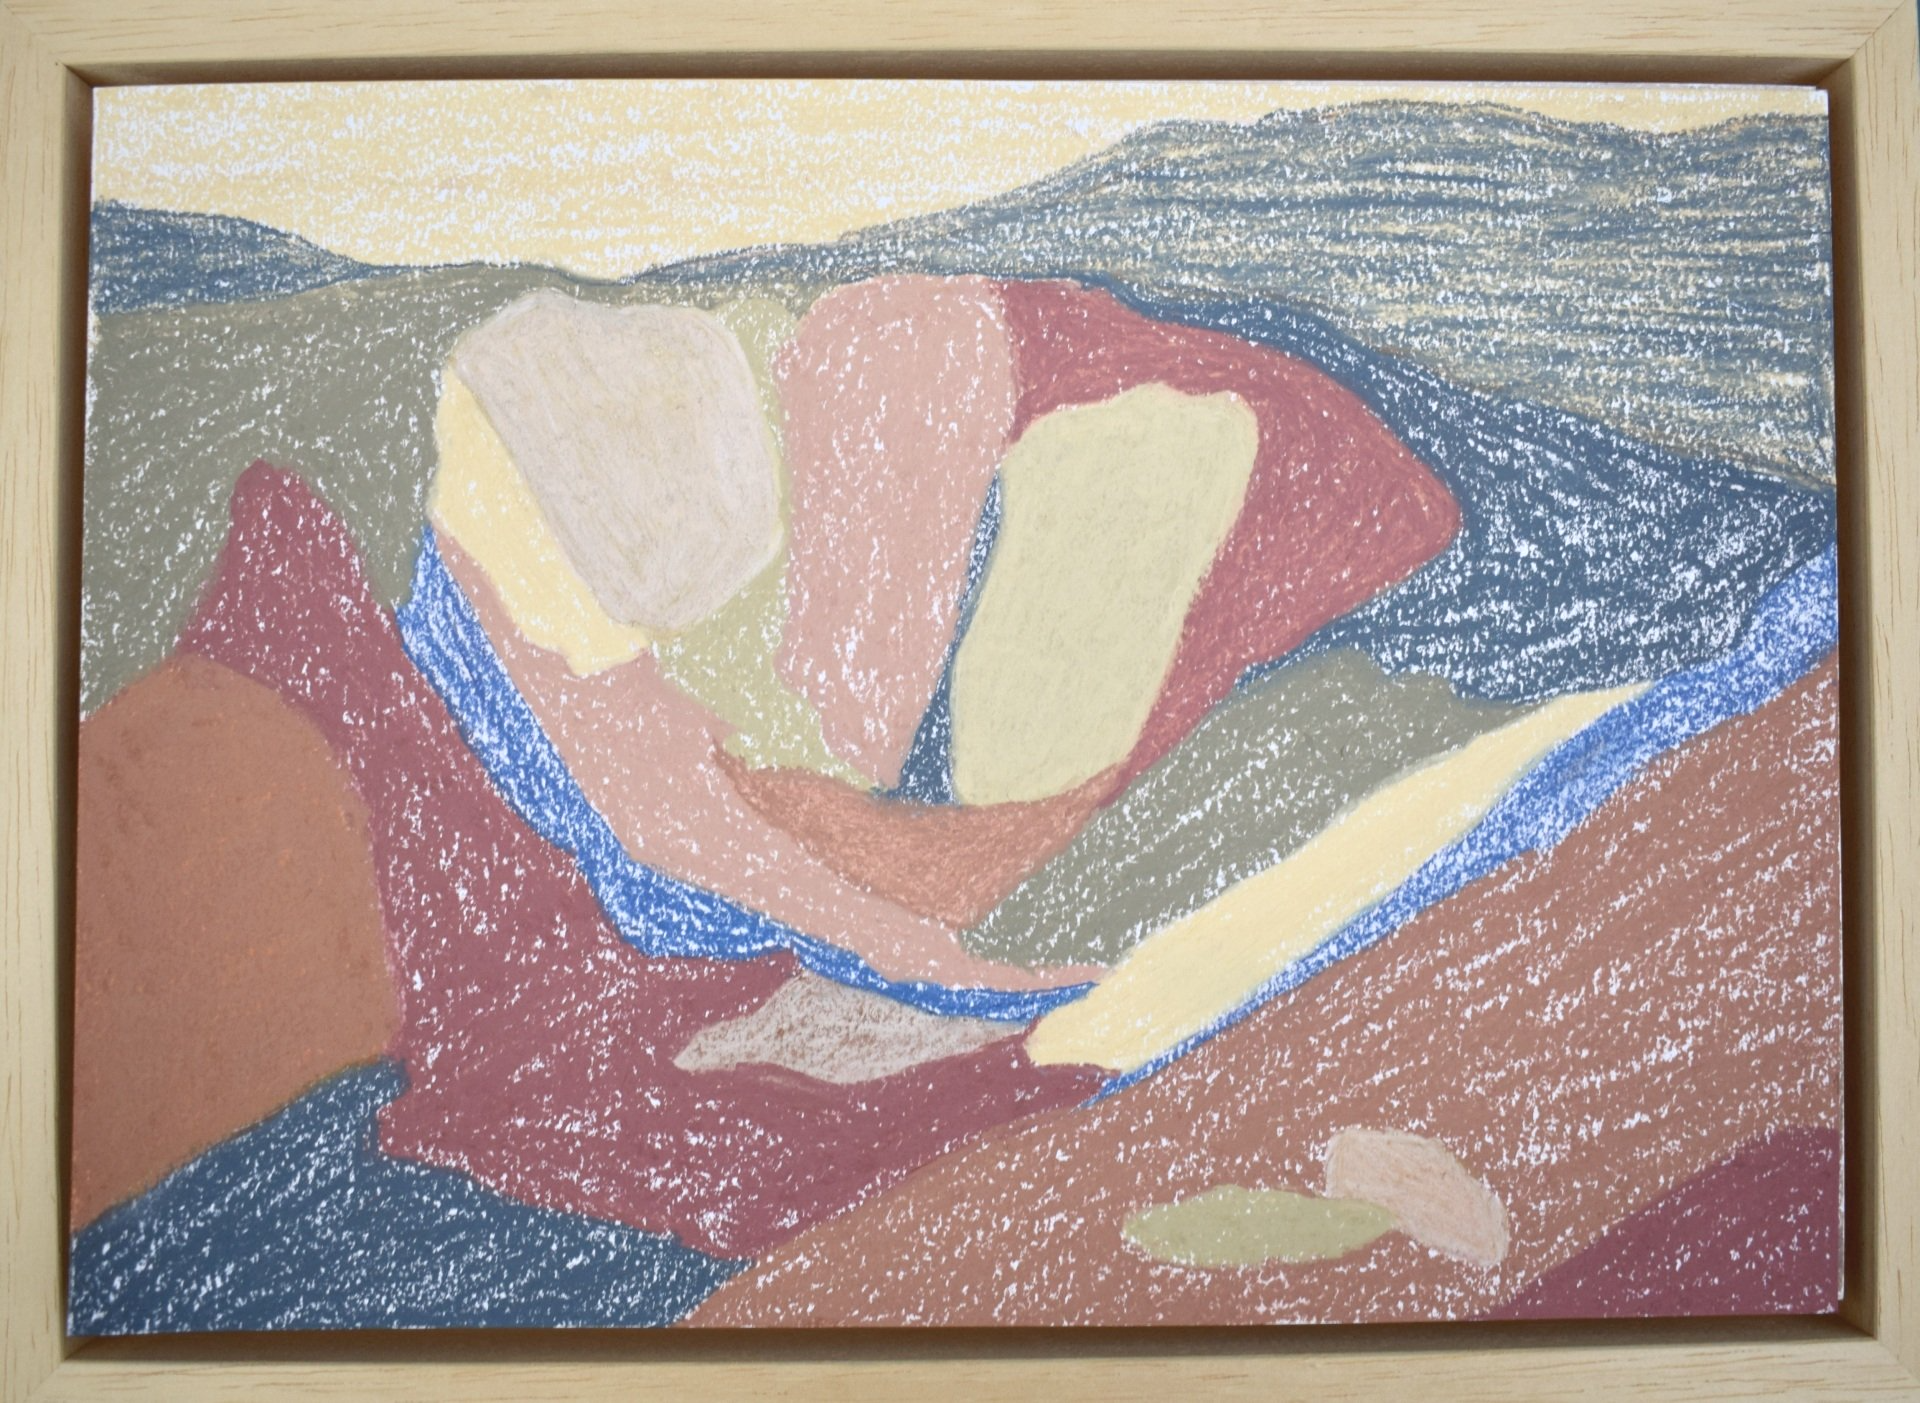 Image of artist drawing of abstract landscape with round forms in red, yellow and blue